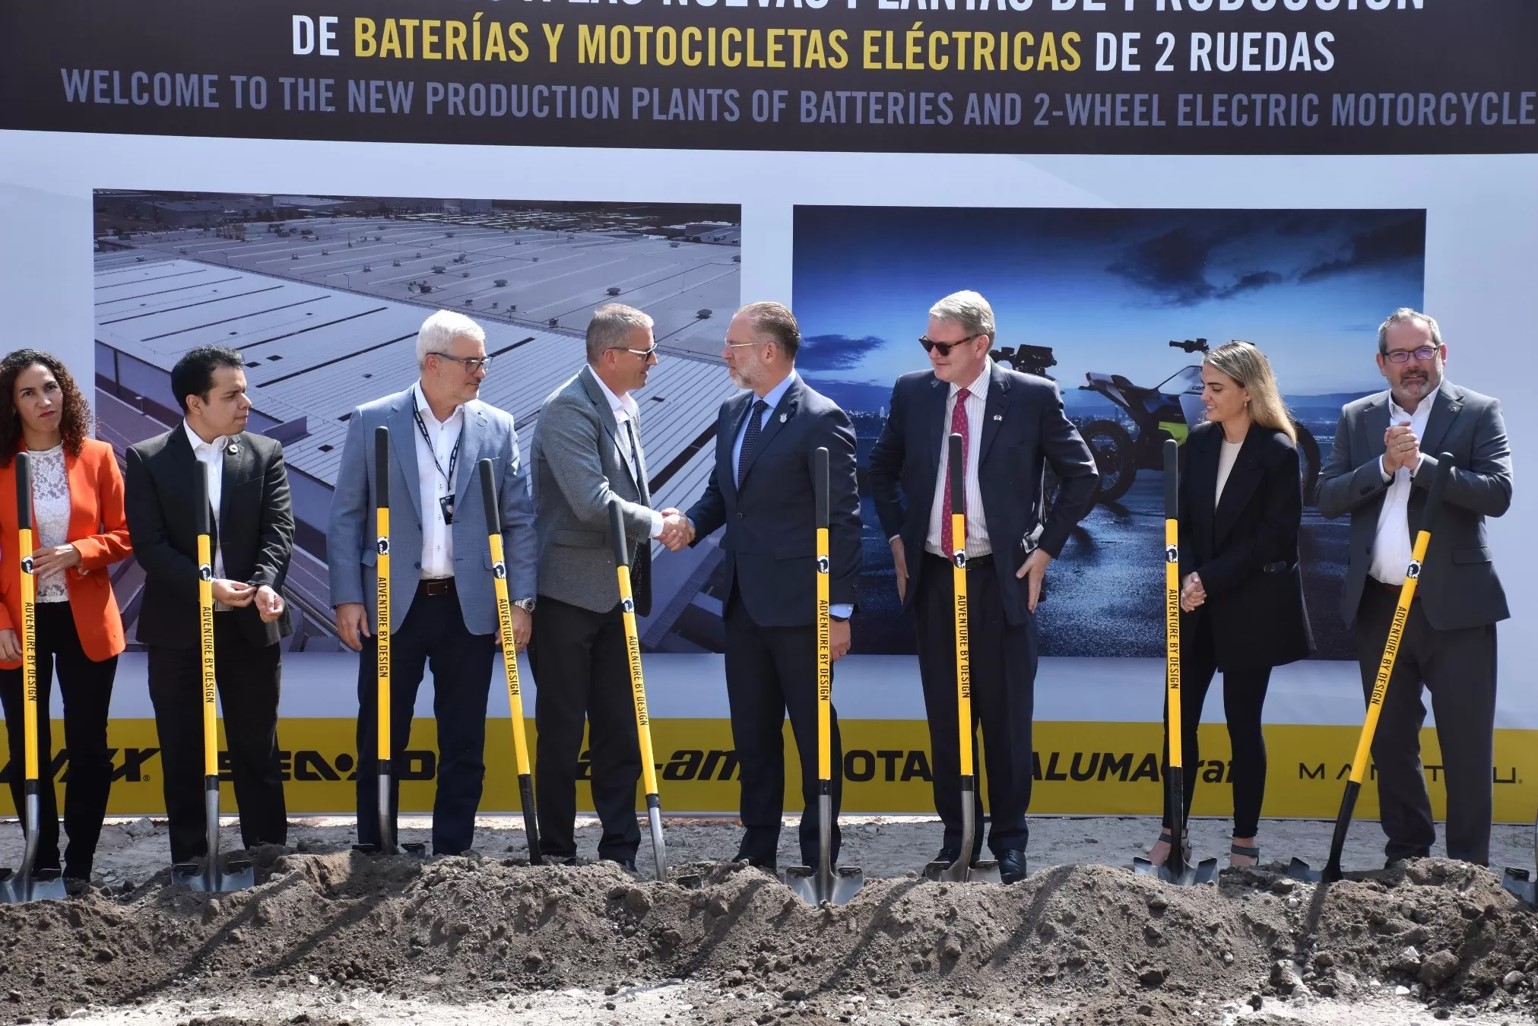 BRP to produce electric motorcycles in Queretaro